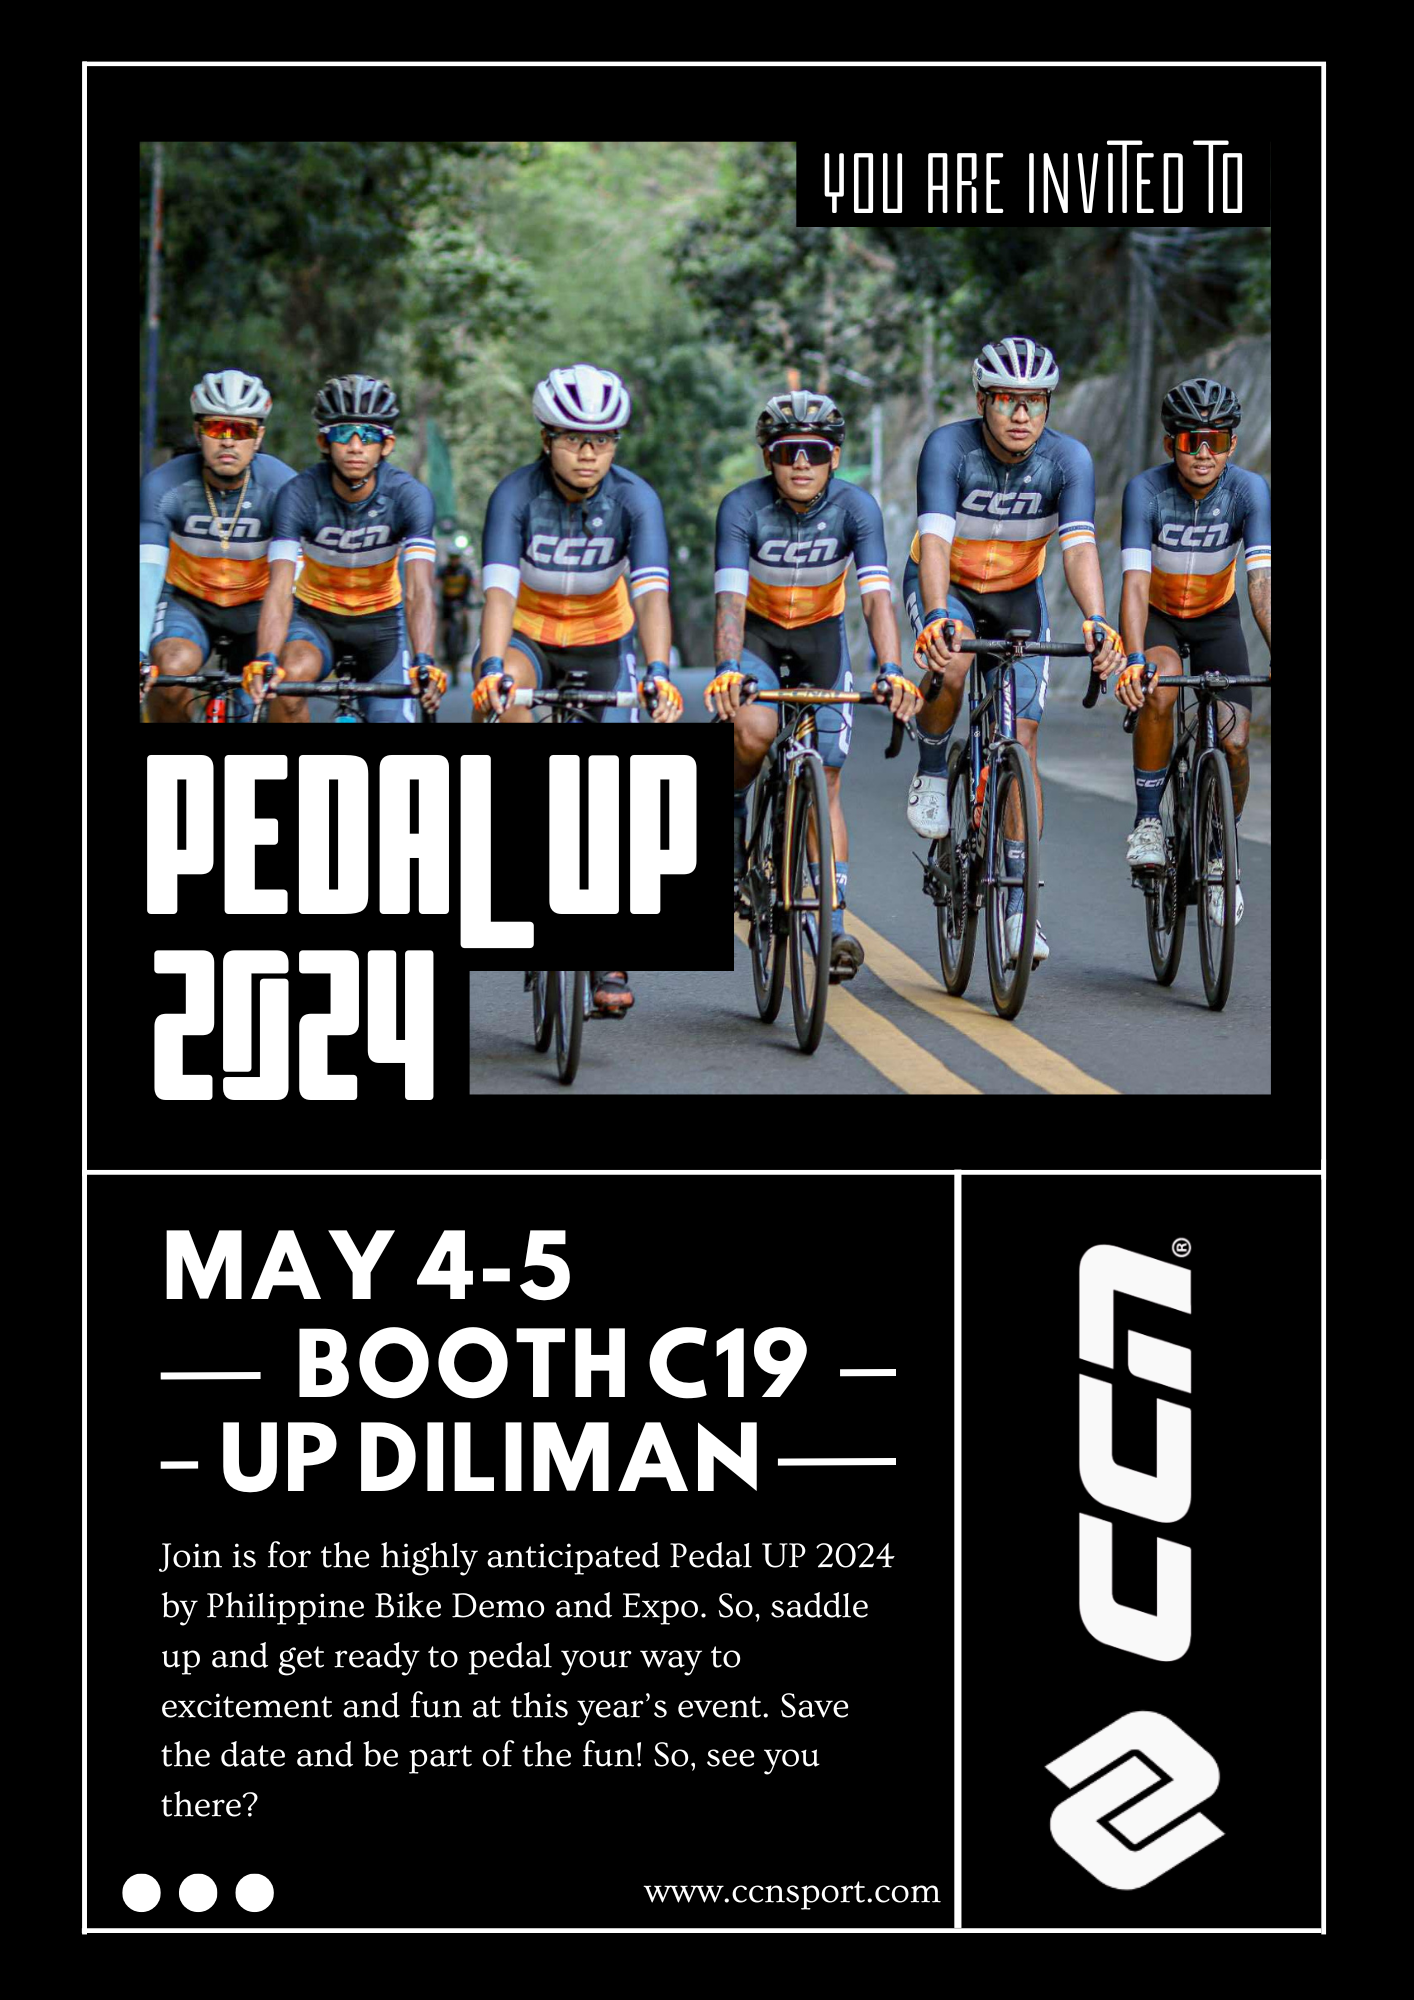 Pedal UP 2024: Uniting Cyclists at the Philippine Bicycle Demo Expo